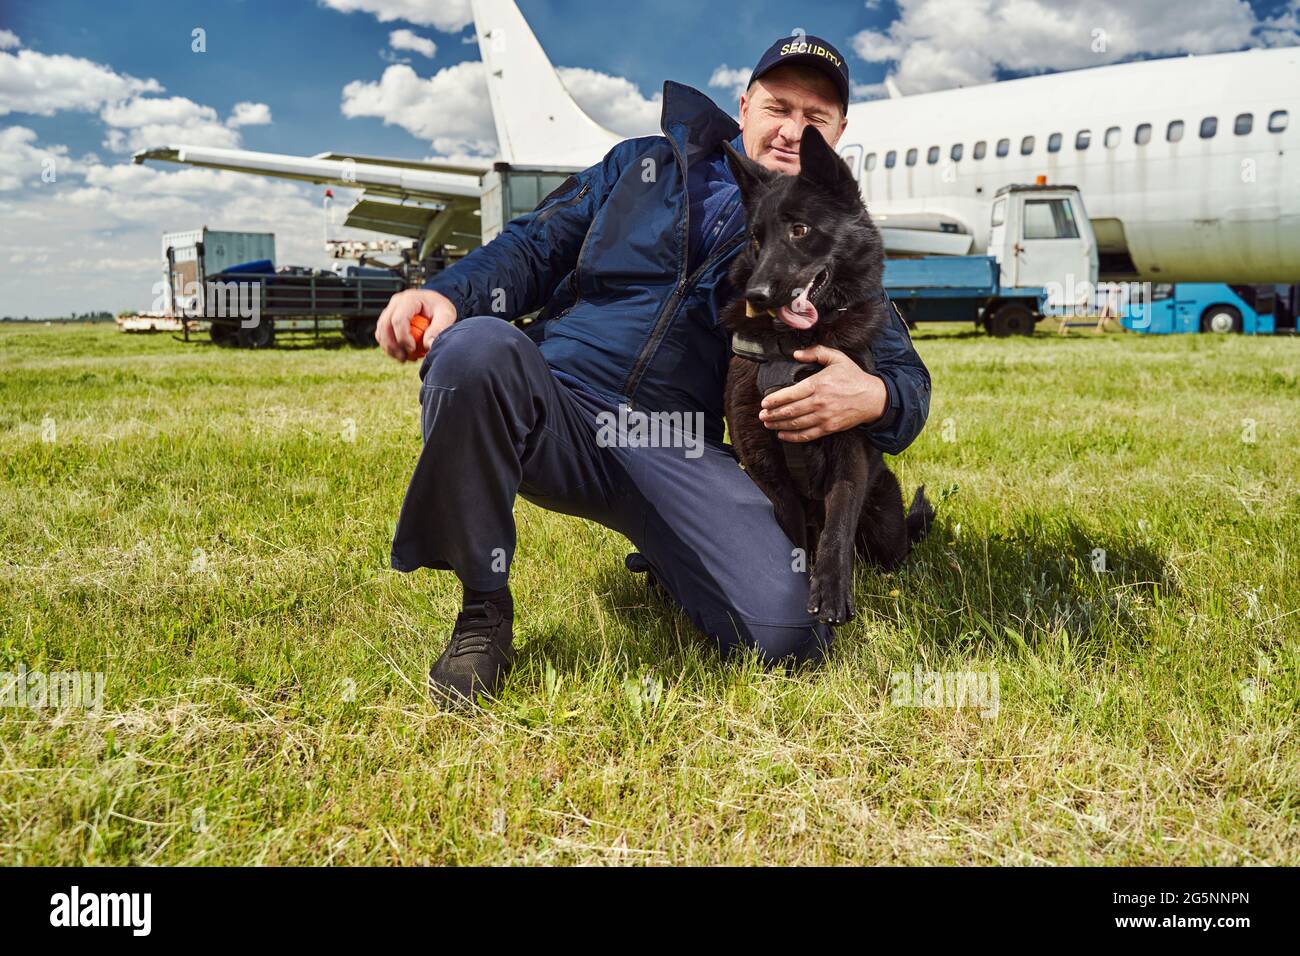 Male security officer hugging detection dog at airfield Stock Photo